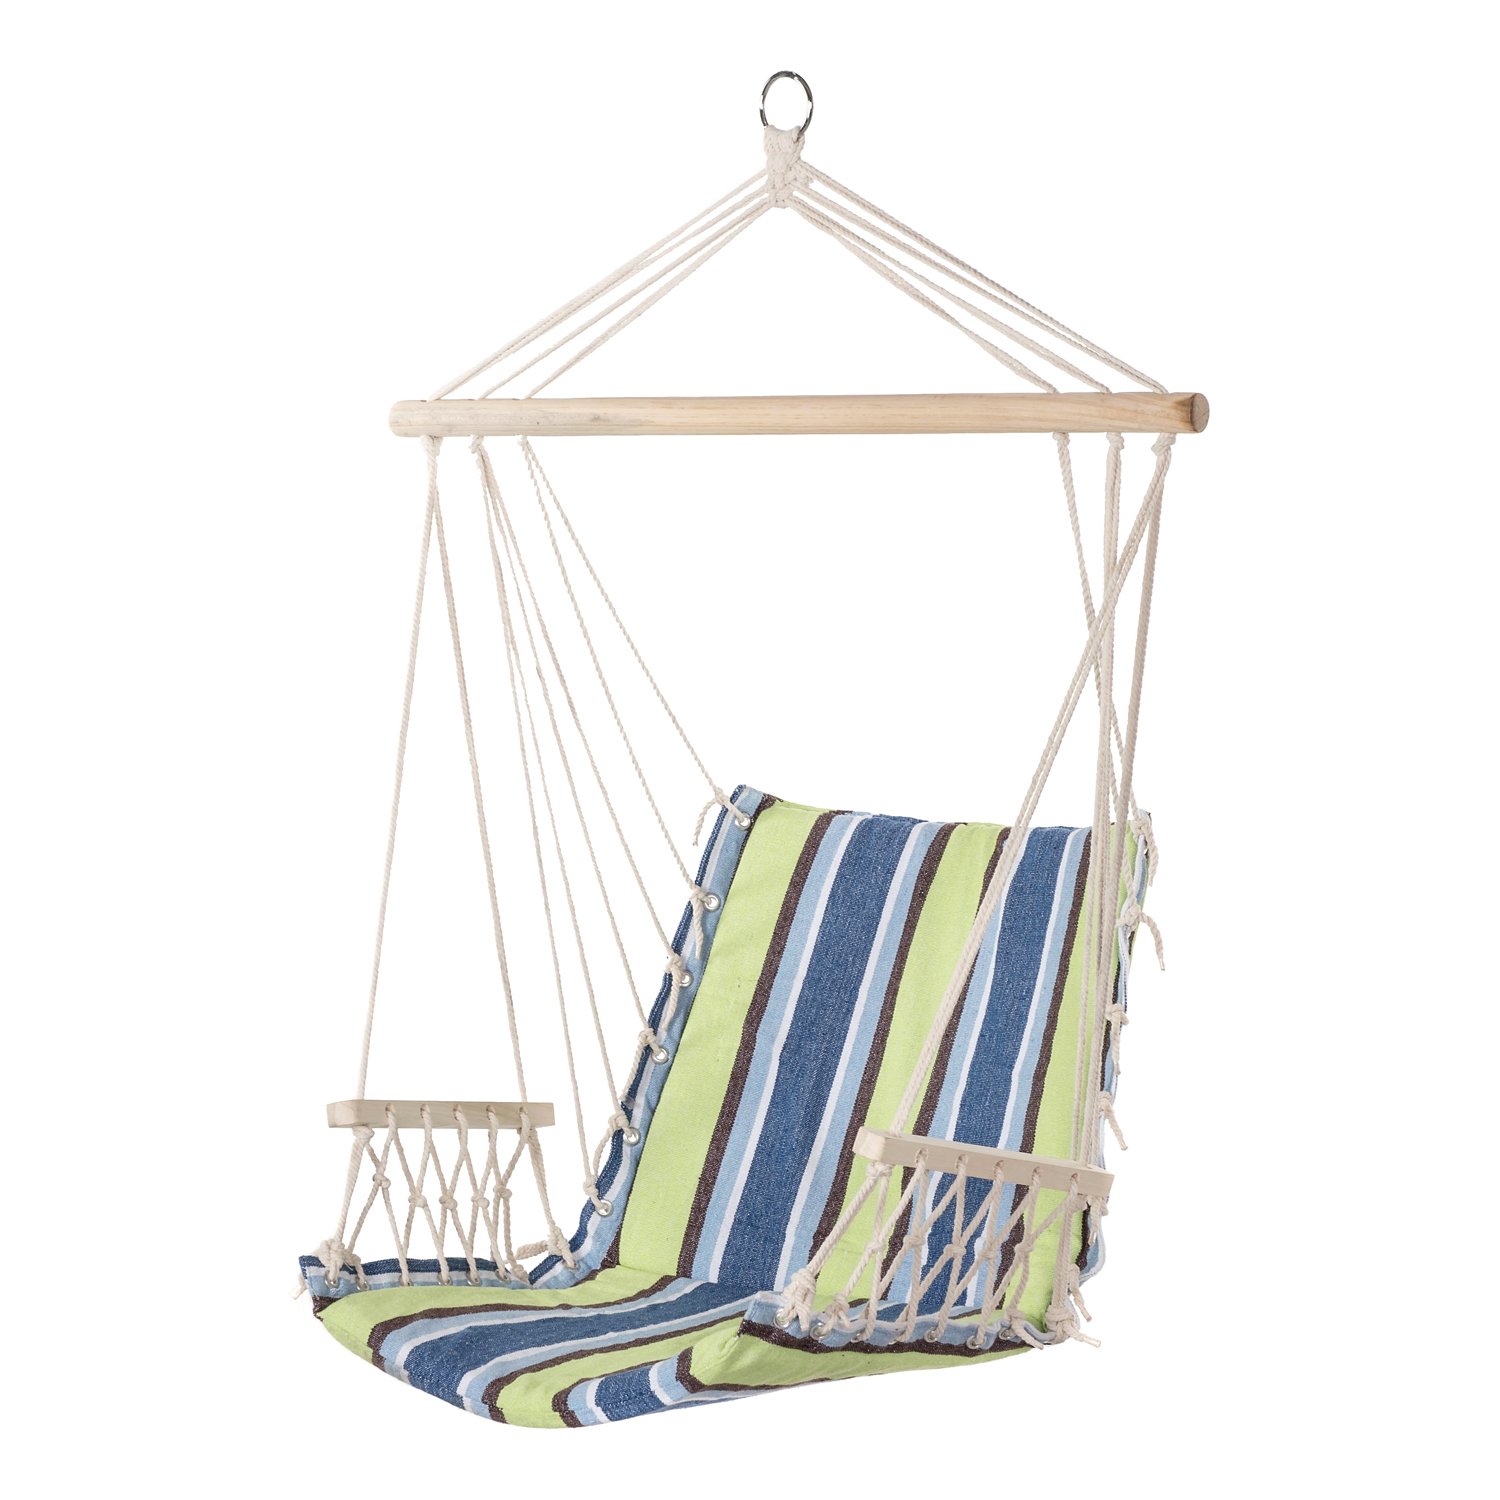 JUNELILY Colored Striped Hammock Leisure Chair for Indoors & Outdoors (Blue & Green Stripes) - image 1 of 7